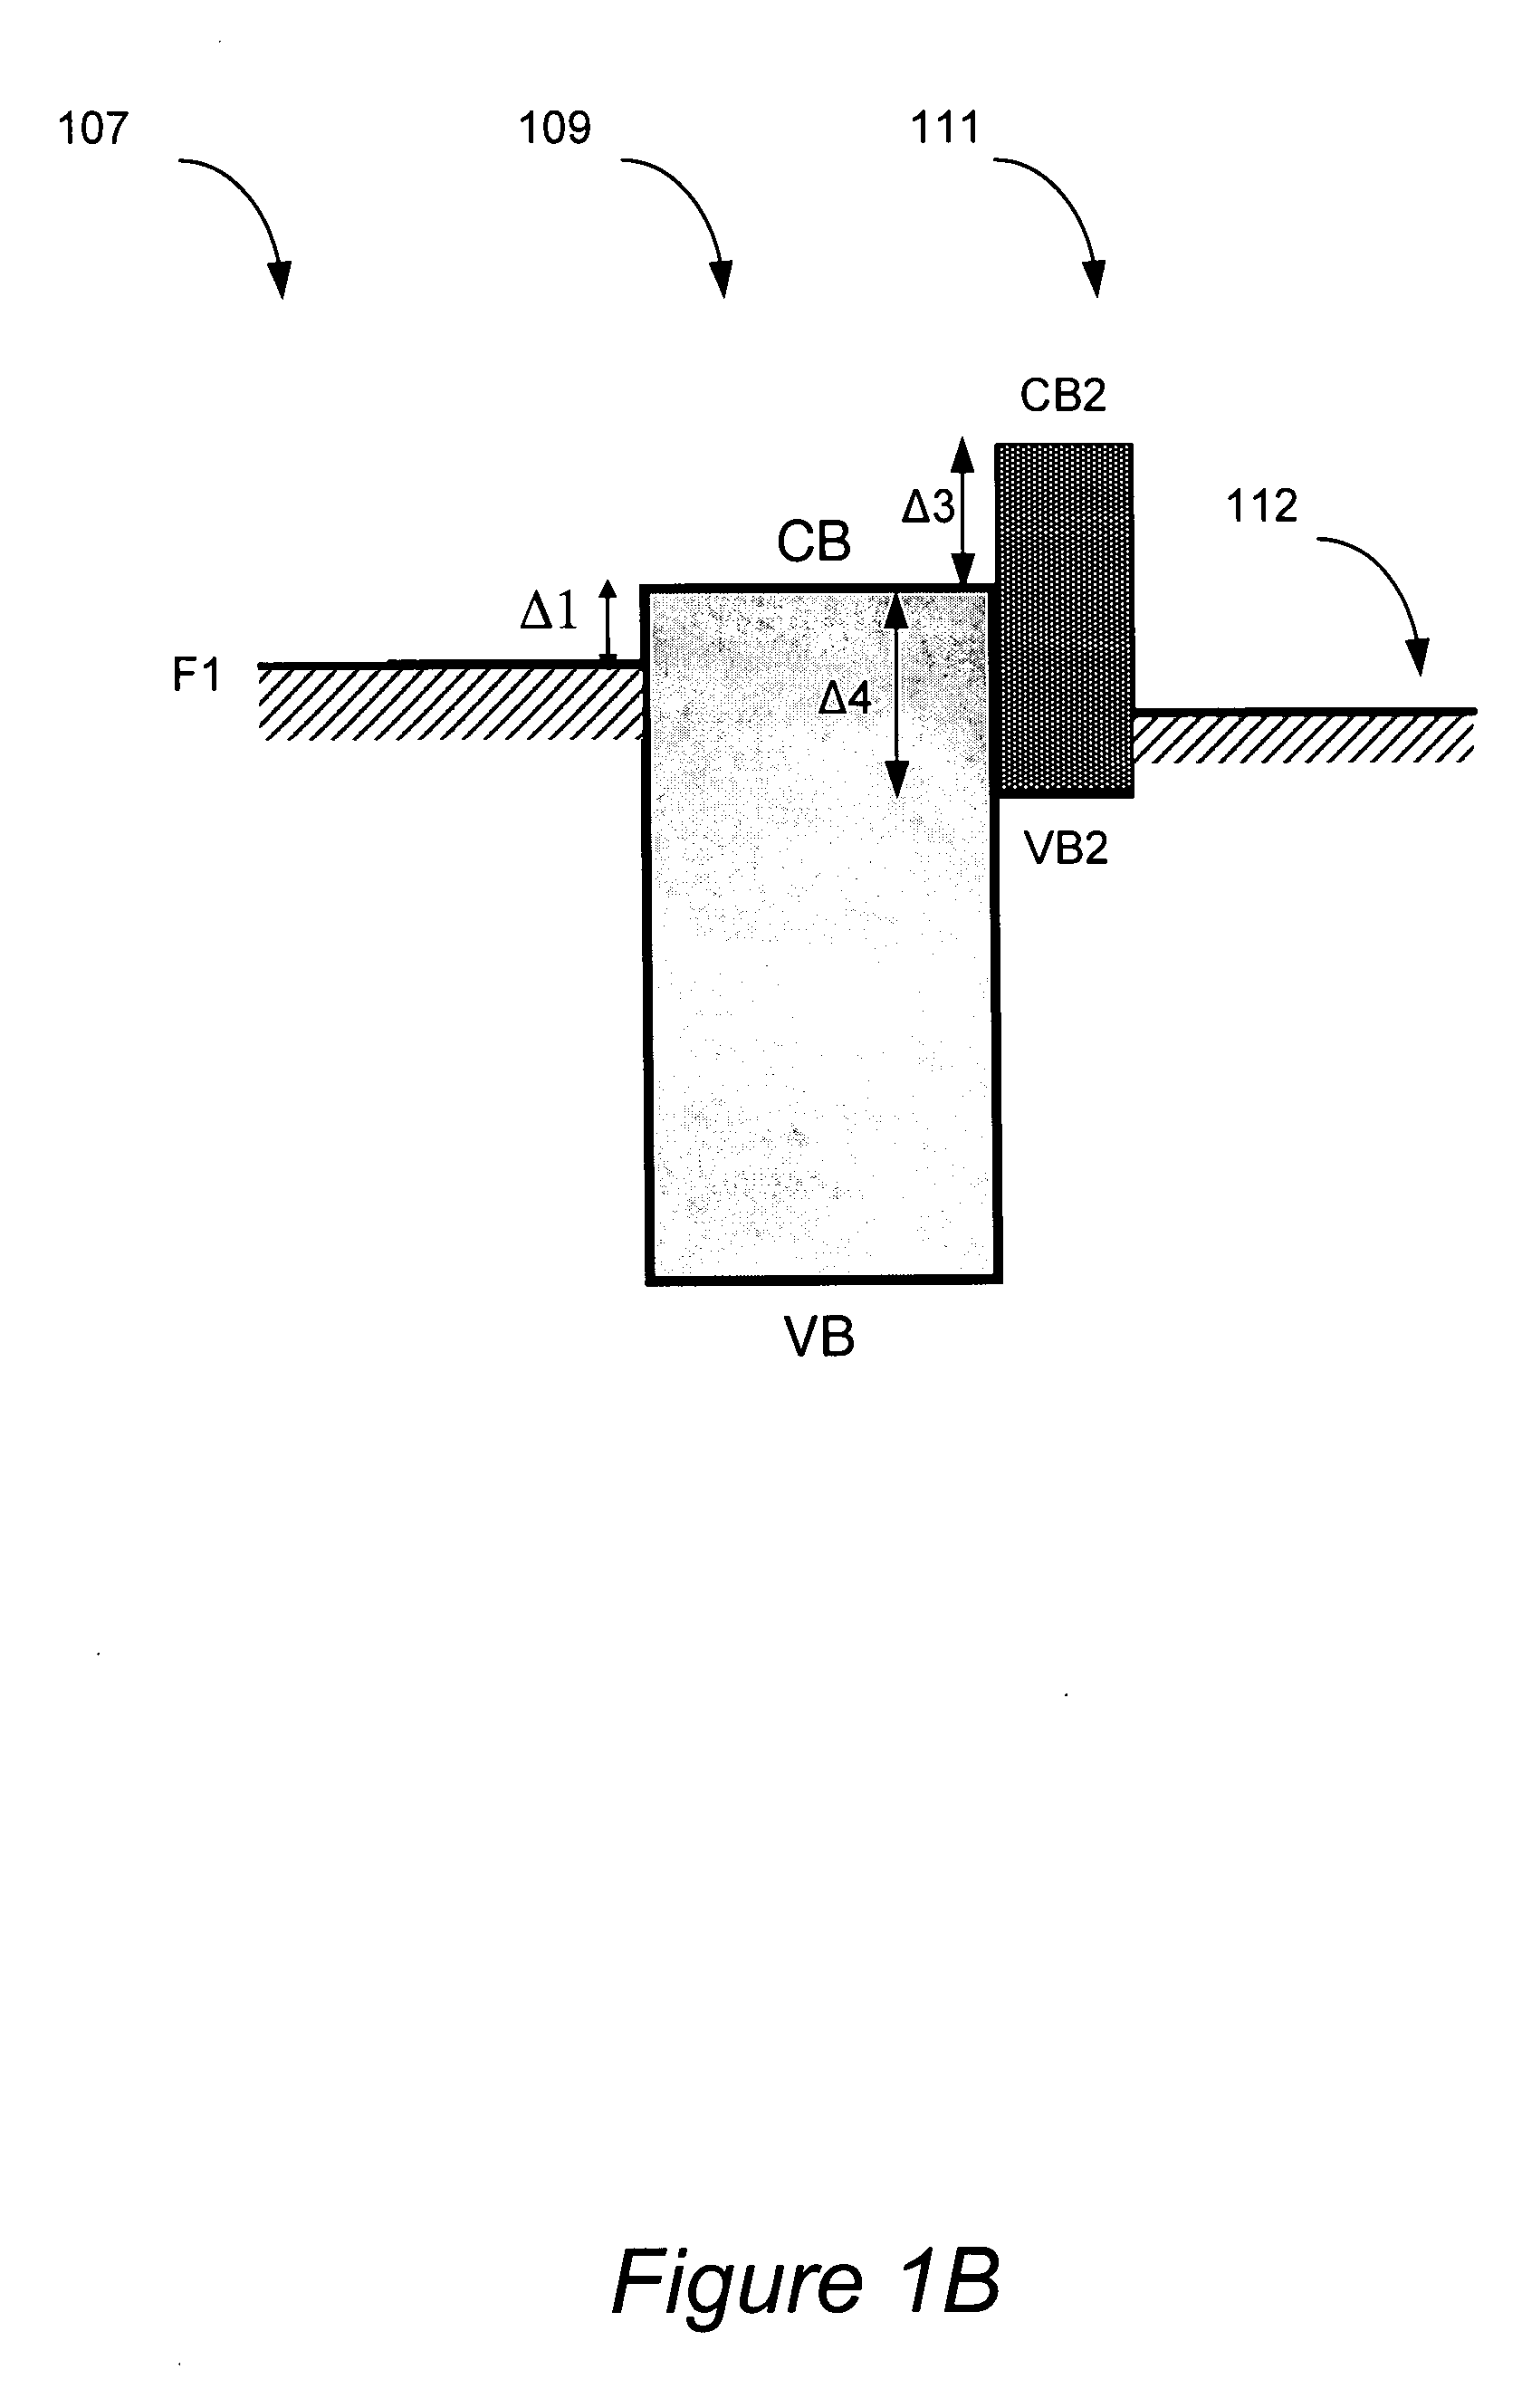 Two-terminal switching devices and their methods of fabrication